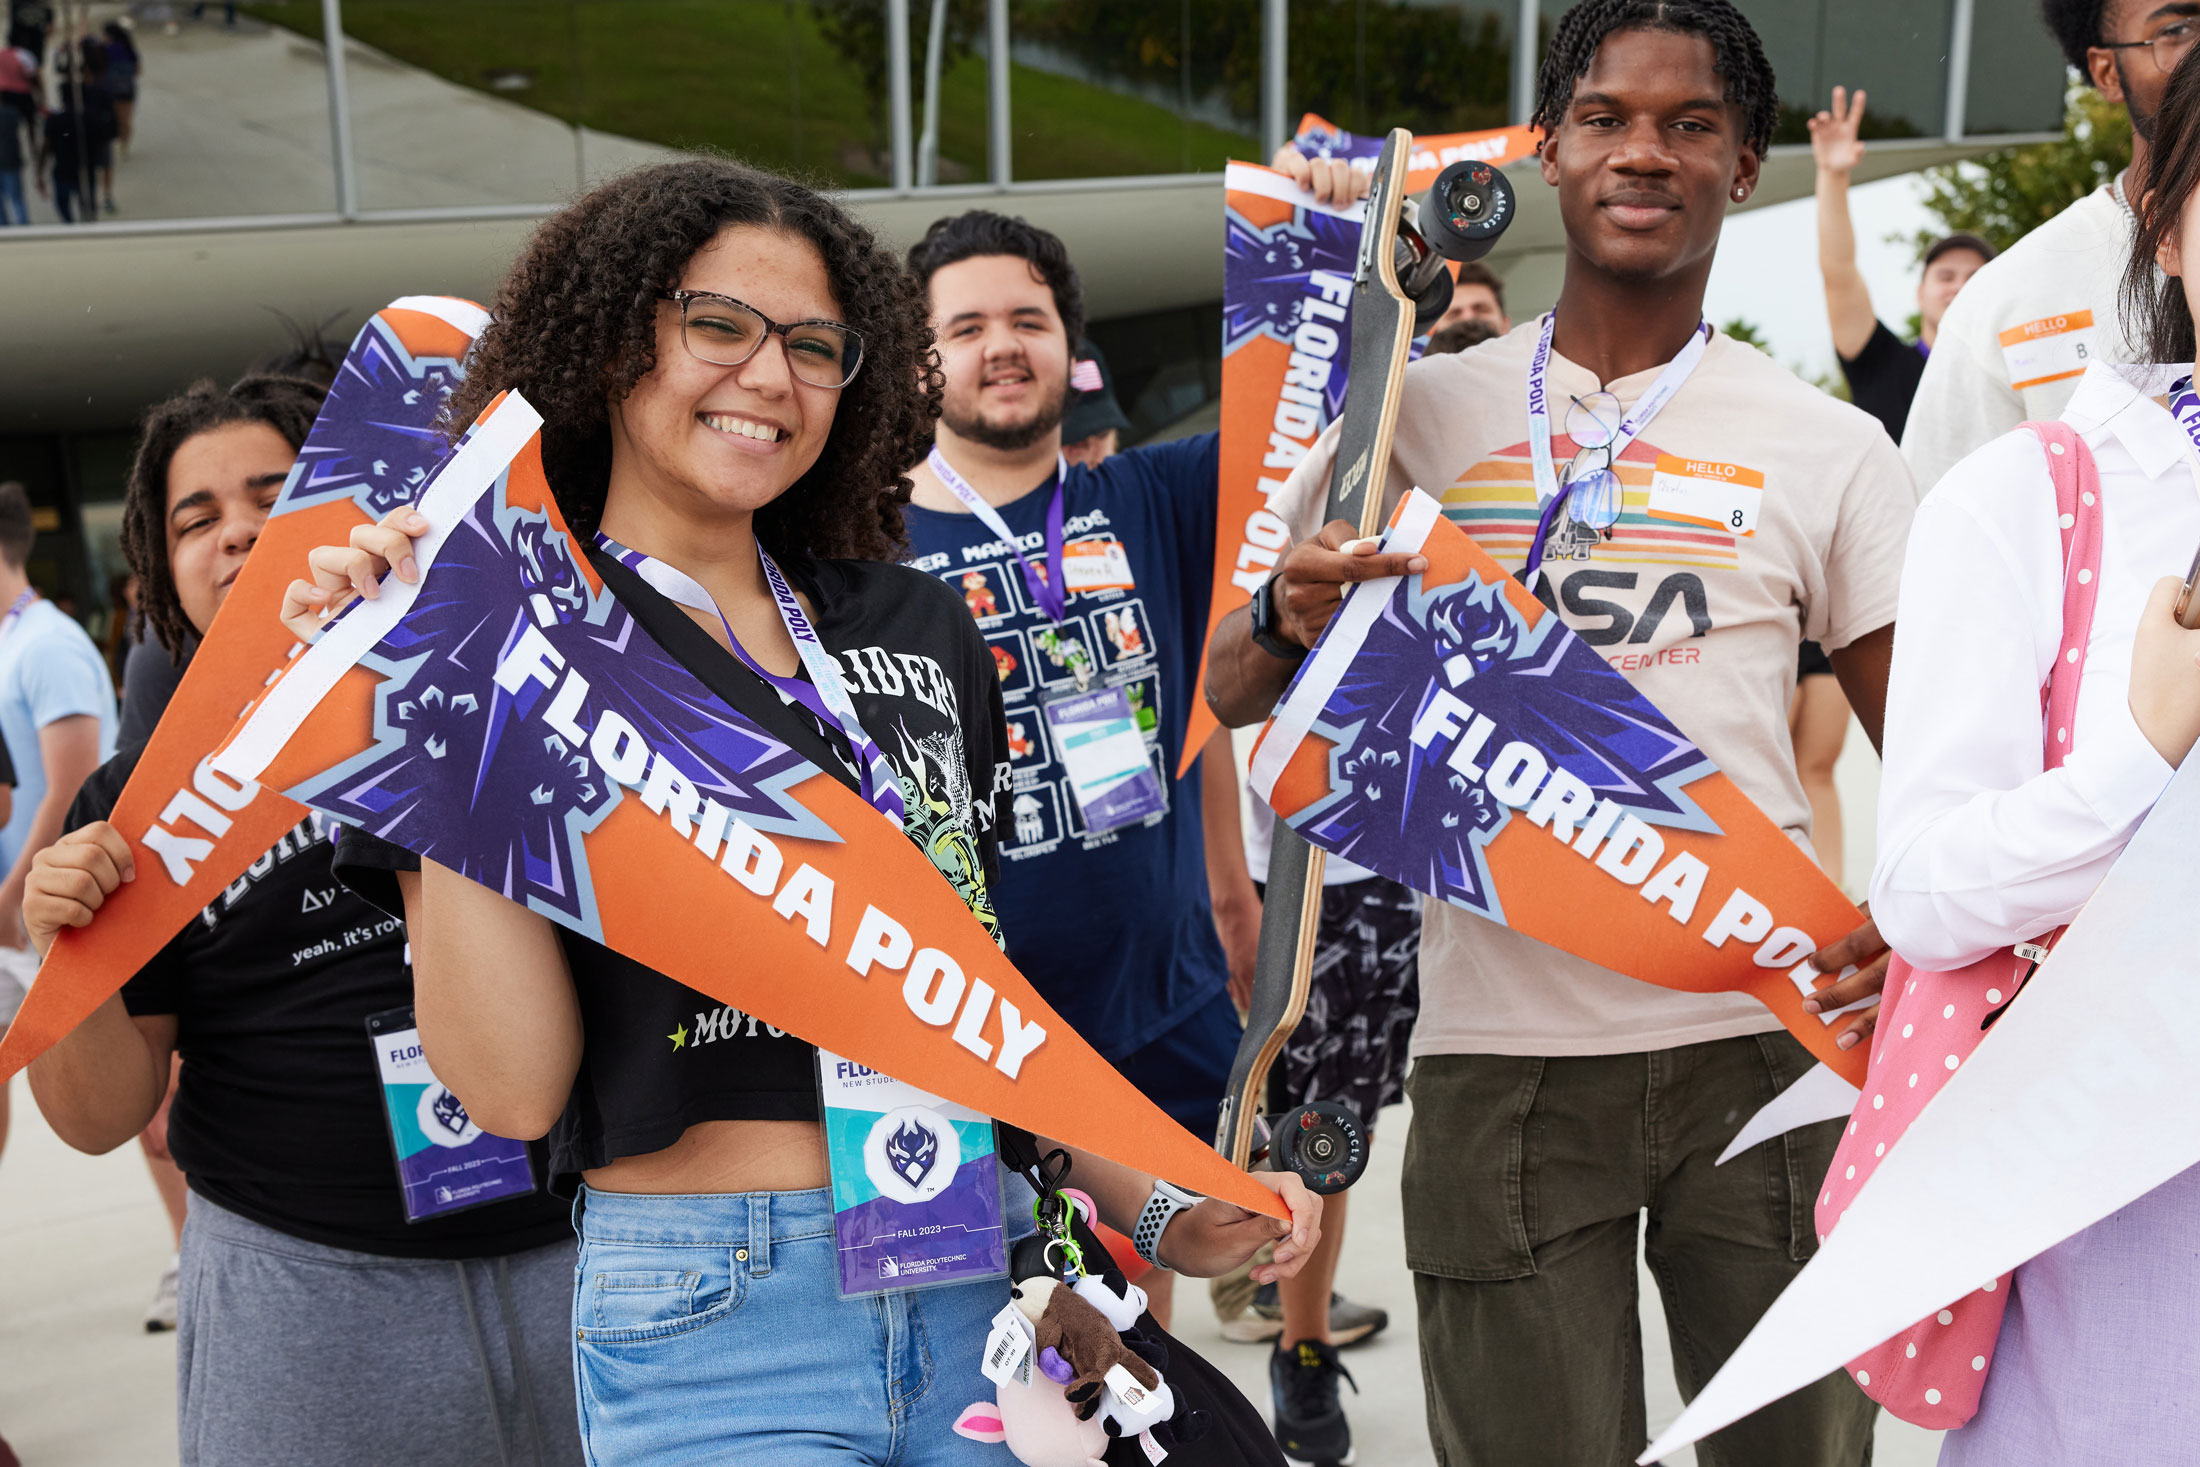 Florida Poly kicks off 10th academic year with exceptional freshmen, exciting growth